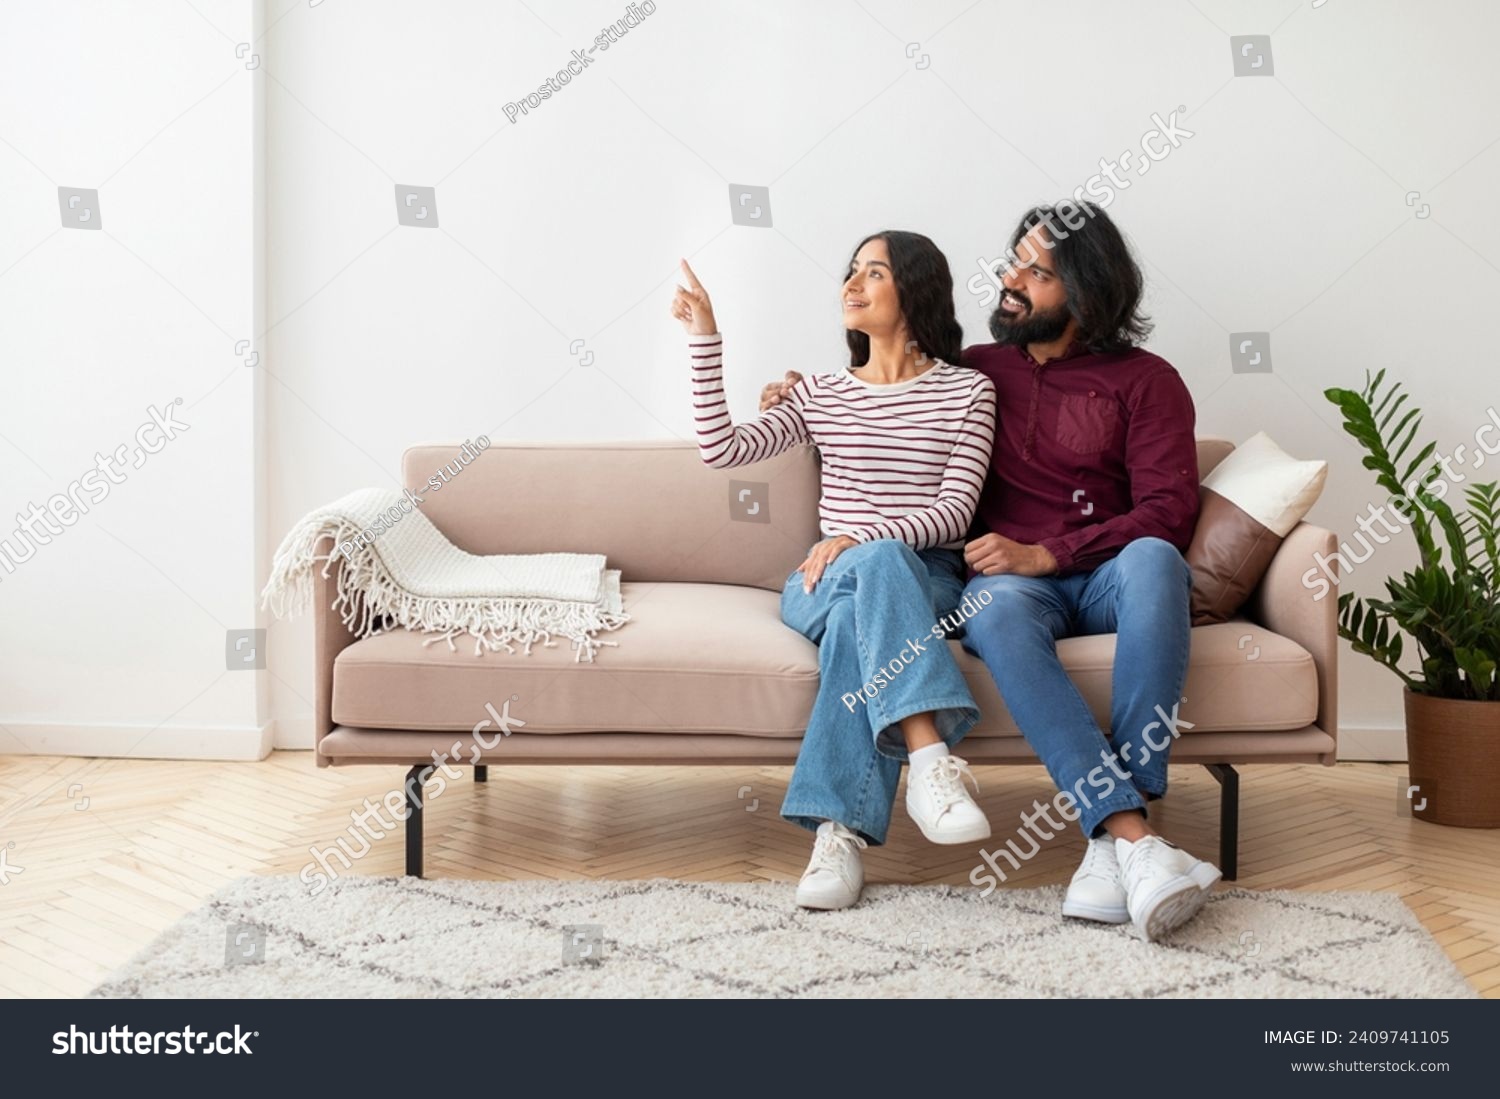 Lovely smiling young indian couple wearing casual outfit sitting on couch at home, brunette woman pointing at copy space, showing her husband nice offer, living room interior. Mortgage, moving #2409741105